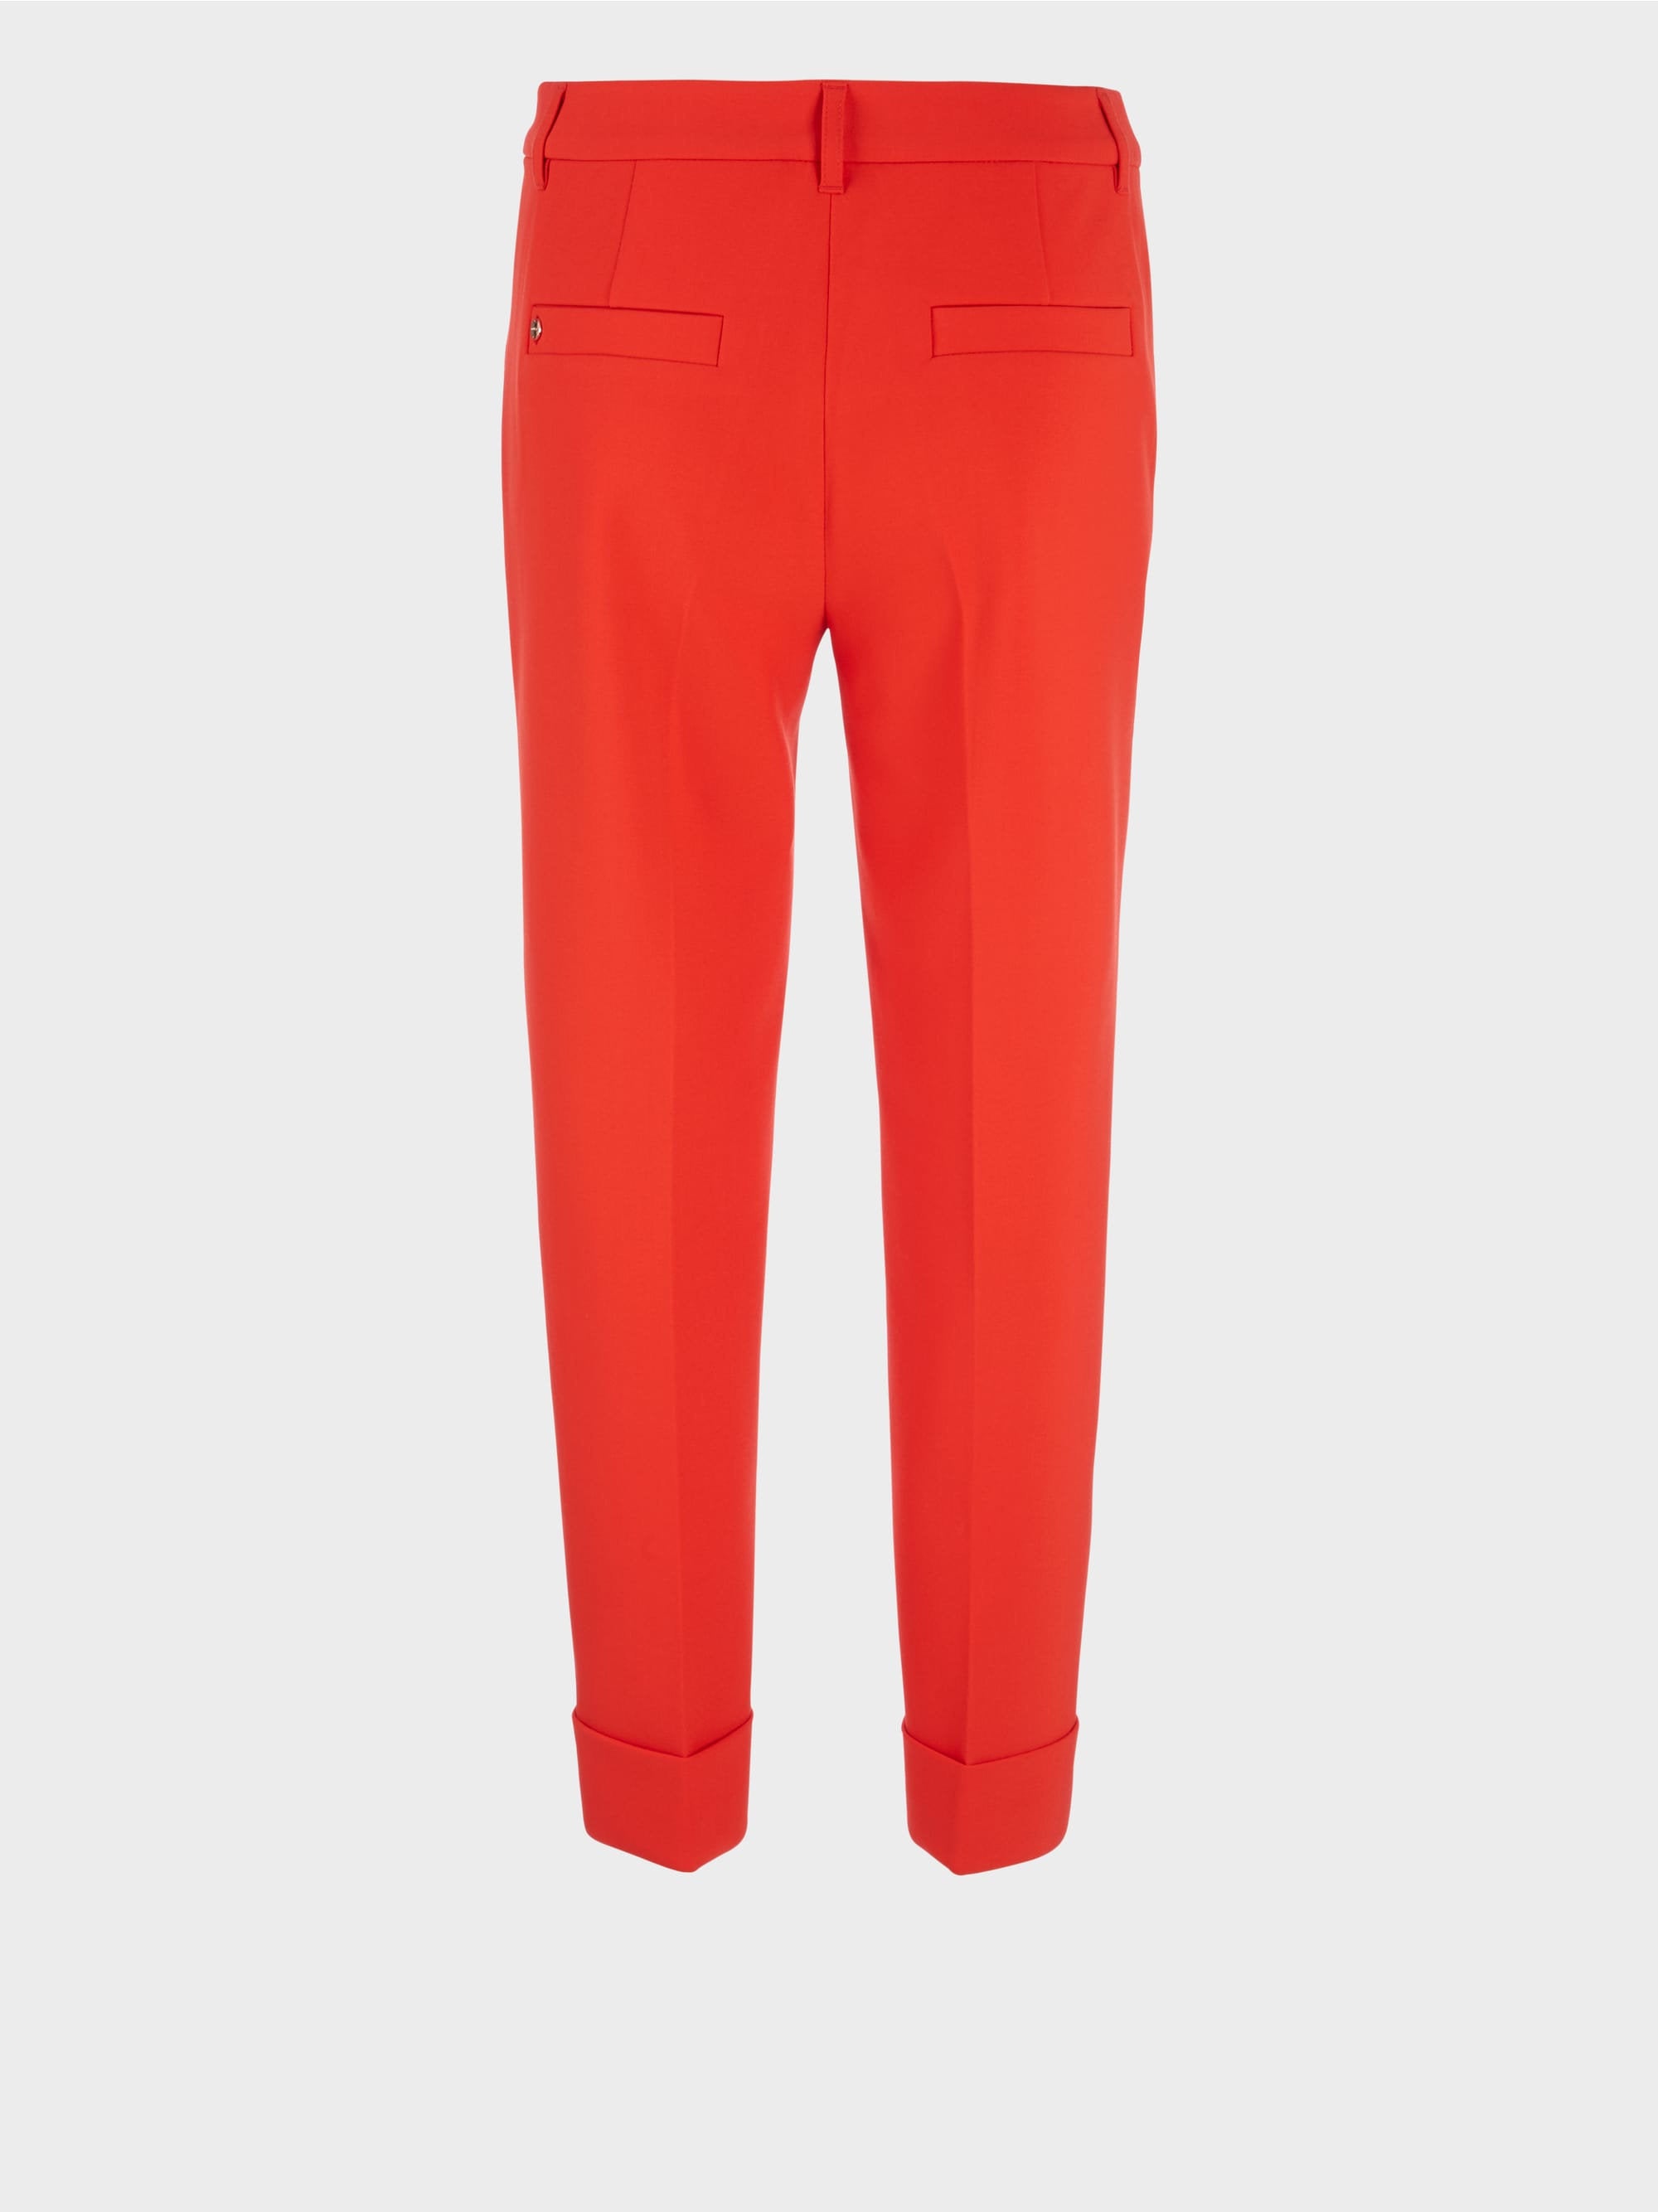 Fordon Pants With Pleat And Cuffs_WC 81.13 W22_223_08